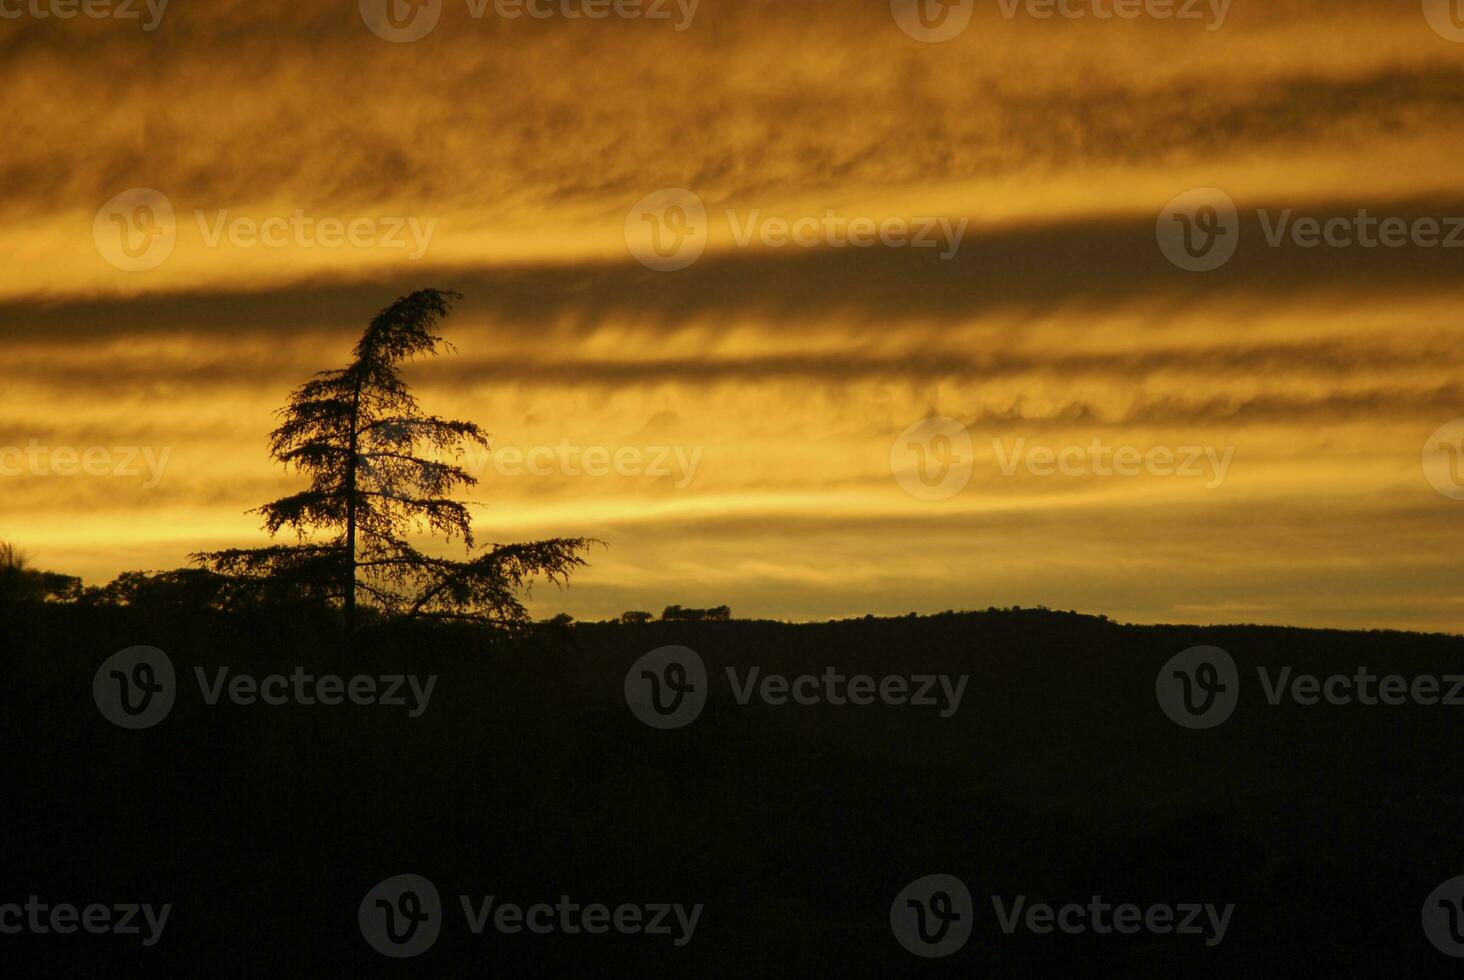 Golden Hour Solitude. Tree Silhouette against Sunset Sky with Clouds photo